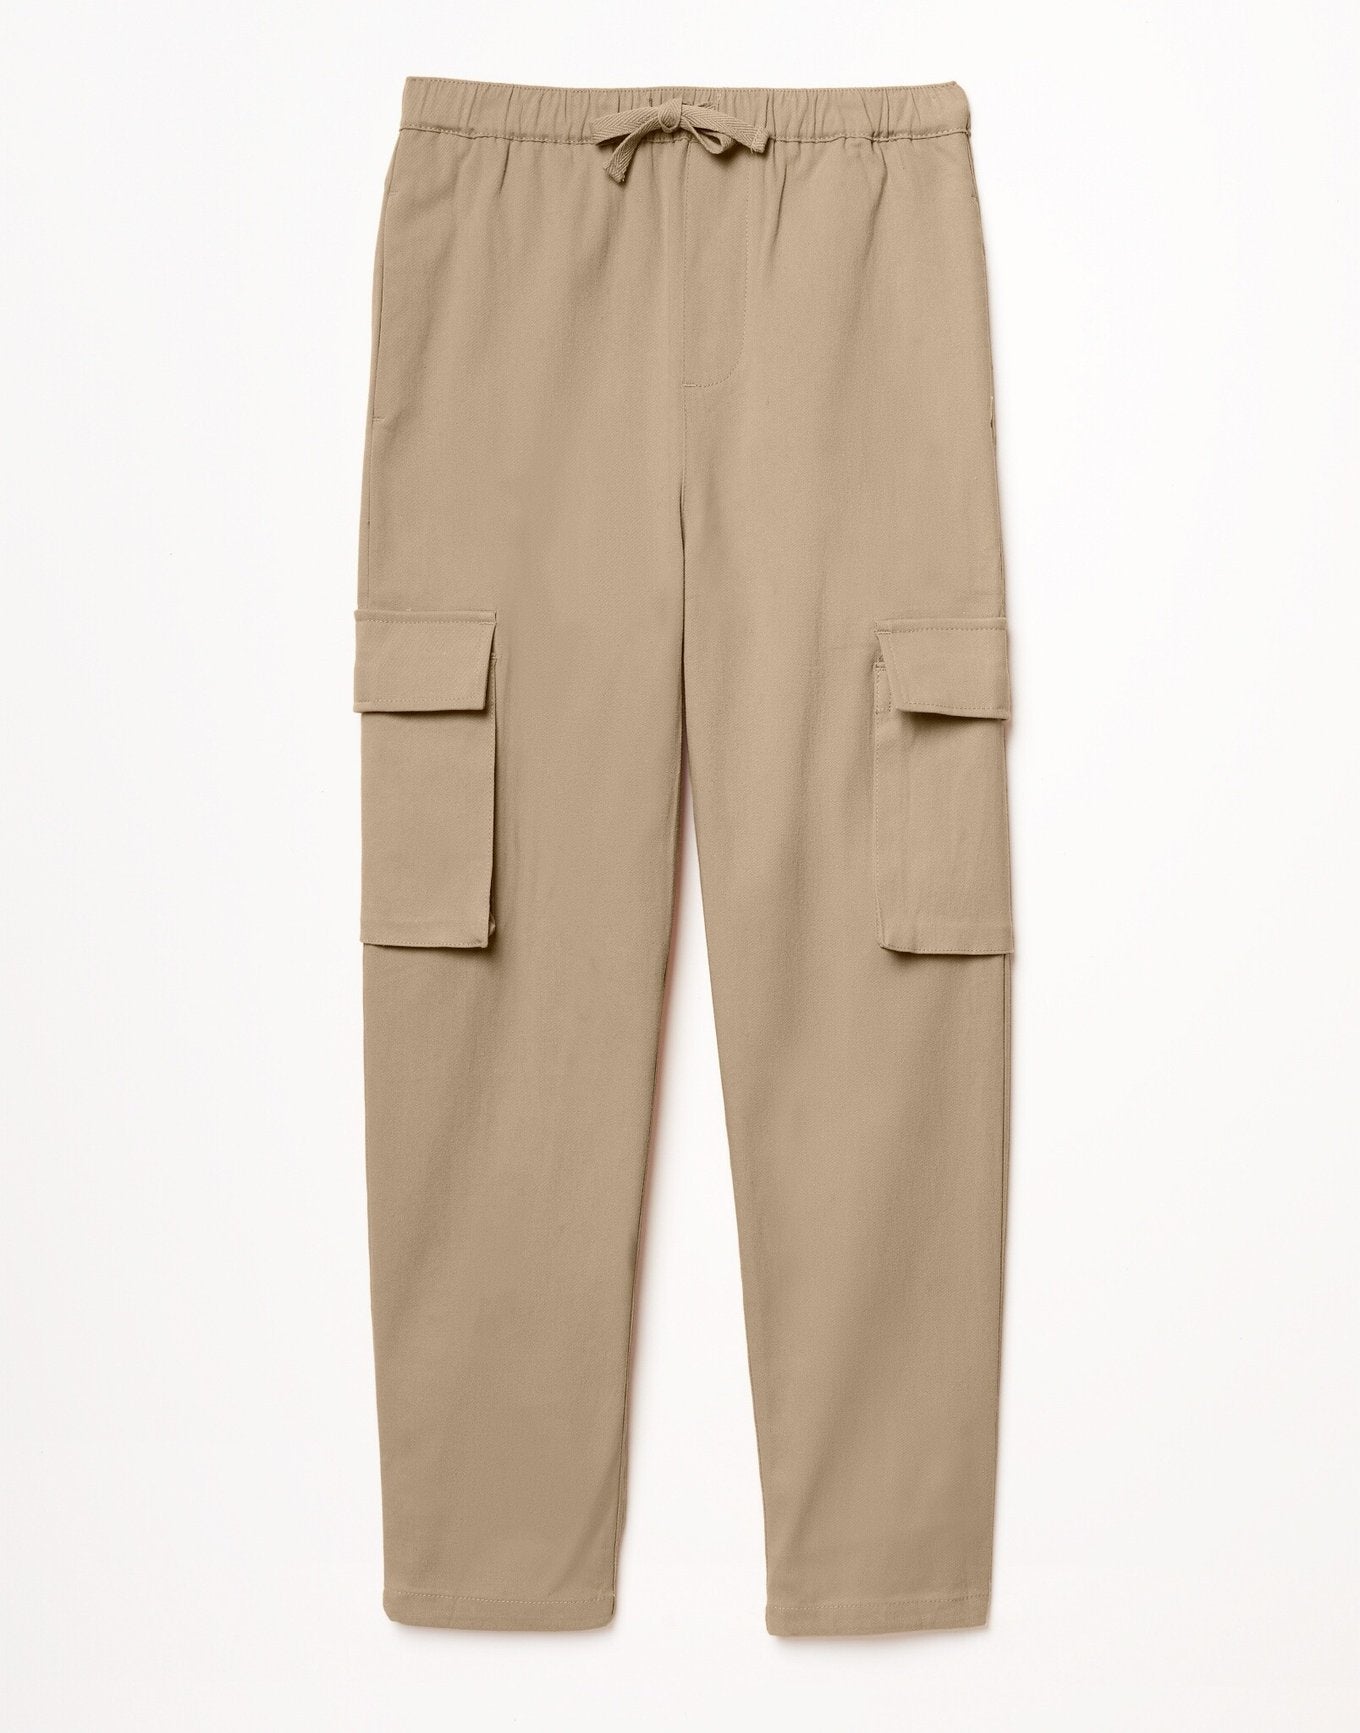 Outlines Kids Easton in color Safari and shape pants